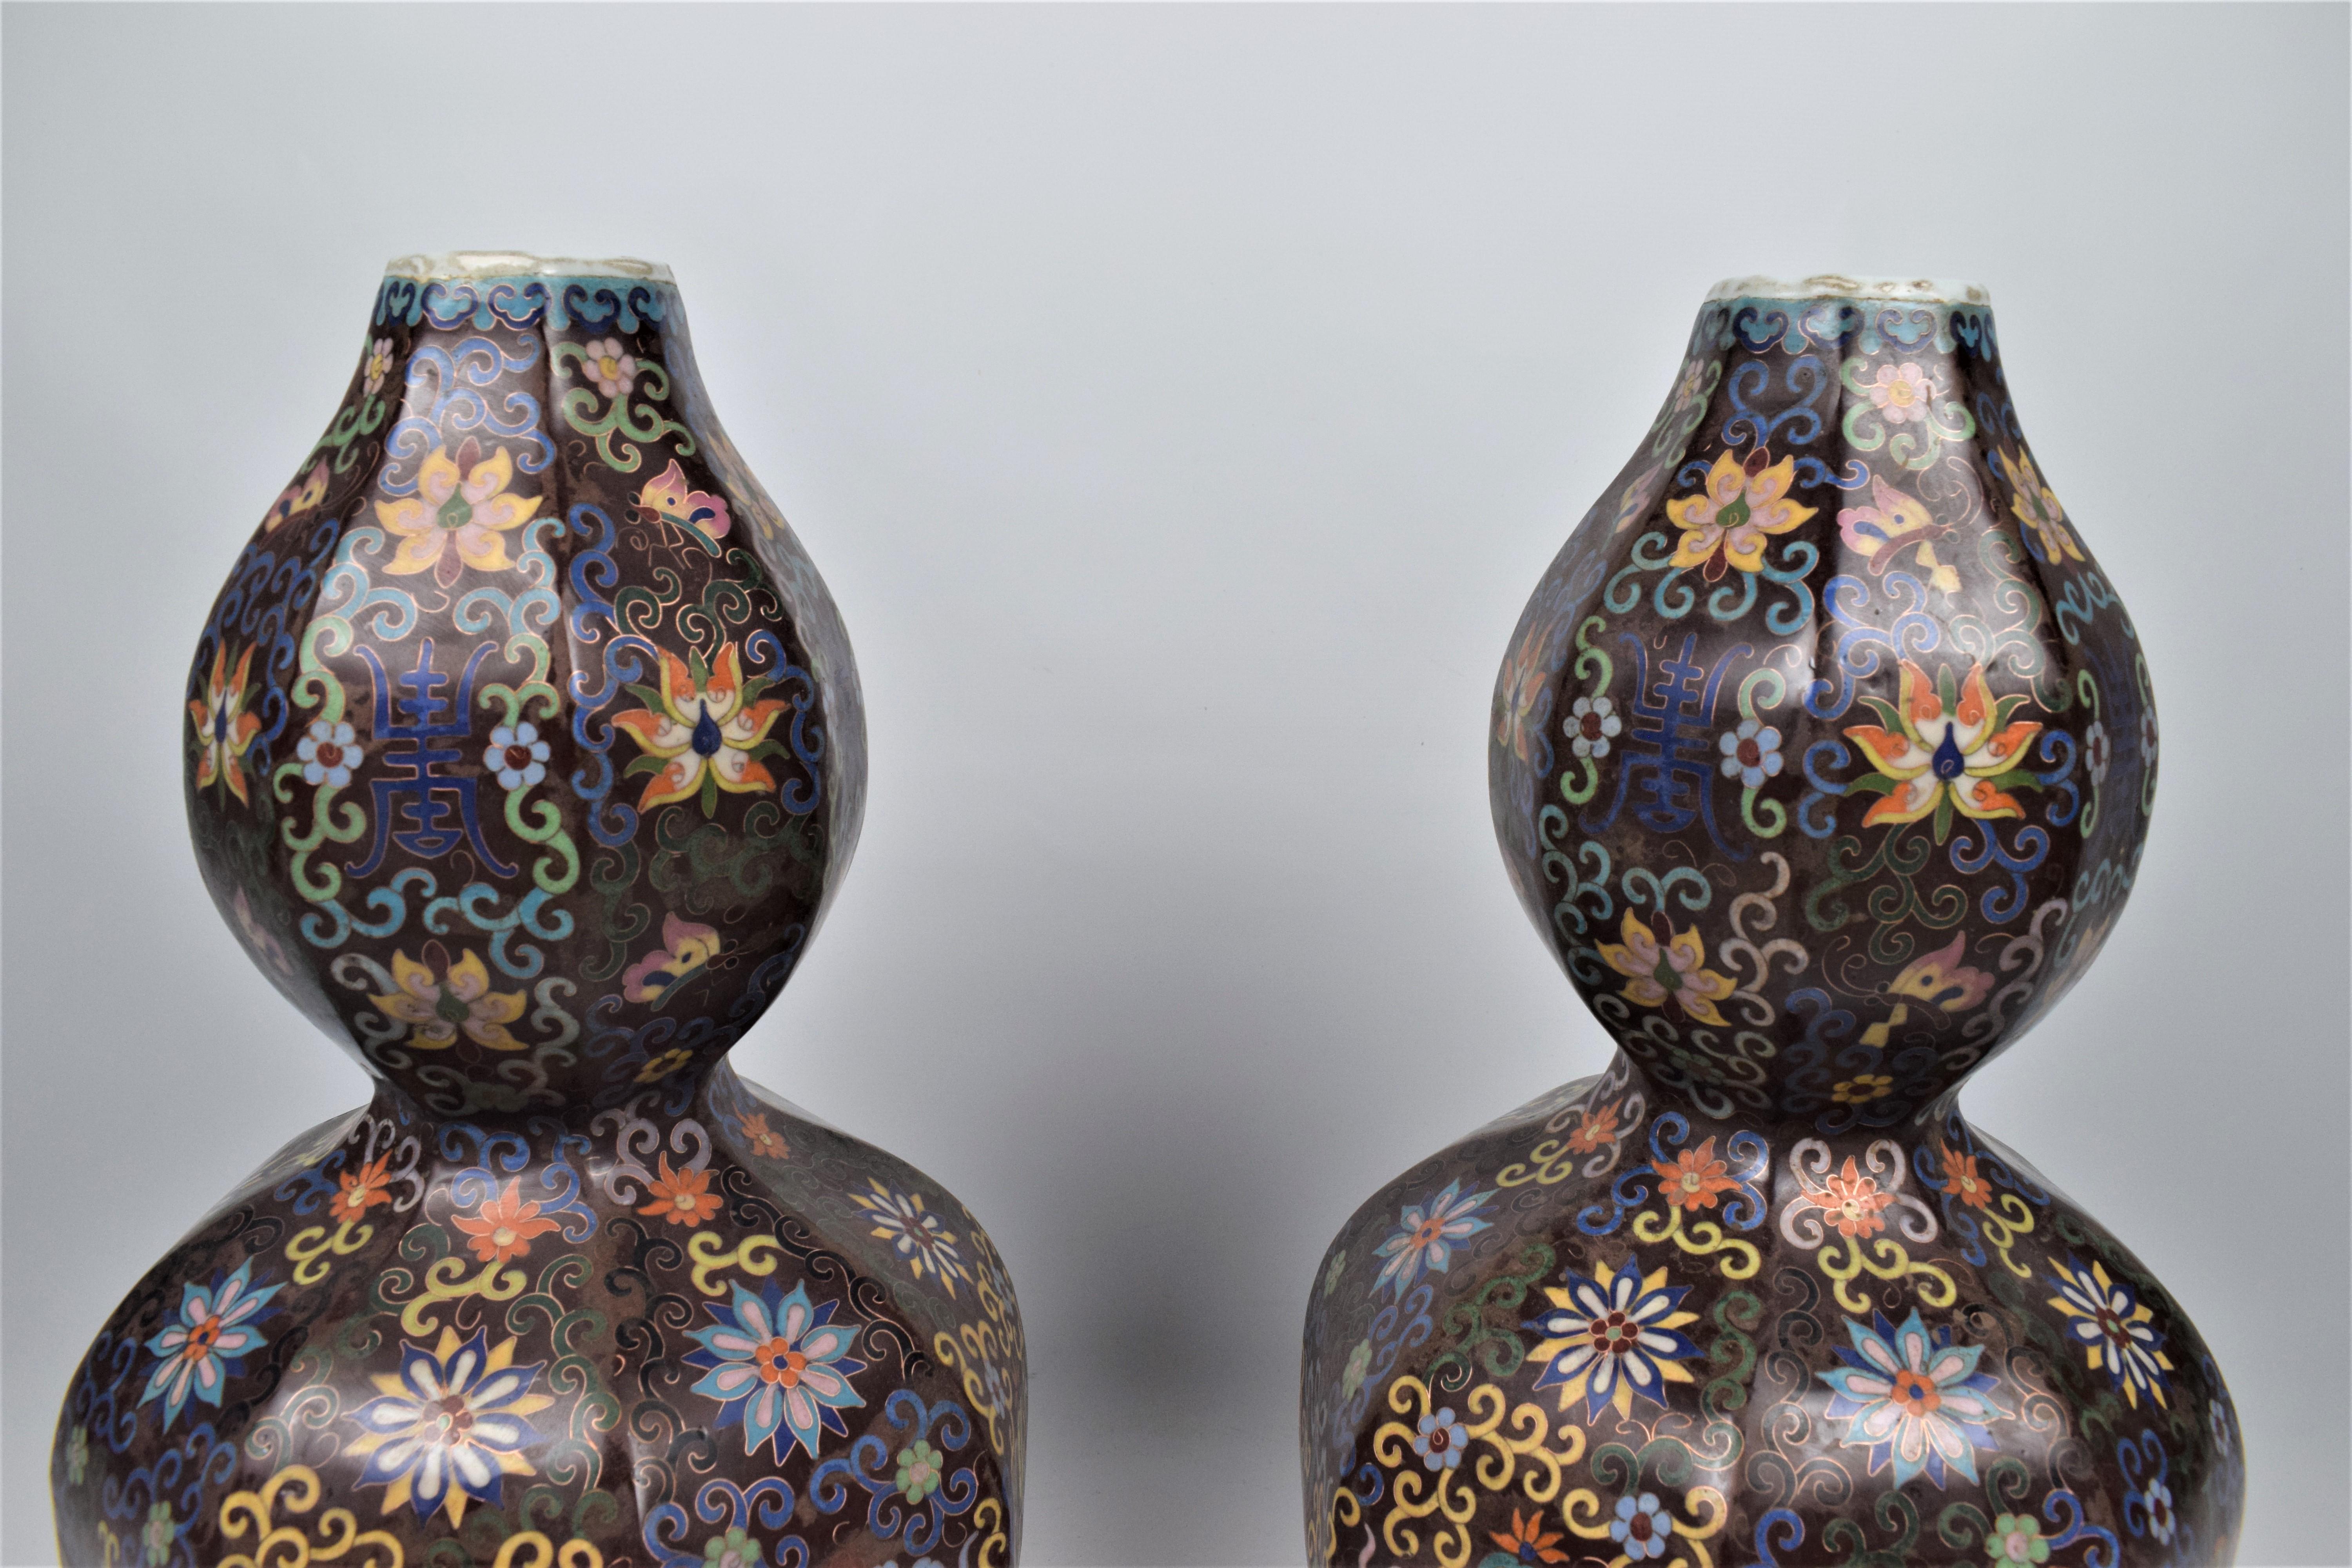 A Pair Of Large Cloisonne´ Enamel Double Gourd Bottle Vases Late Qing Dynasty, 19th century

The Chinese bottle vases are made of porcelain with an intricate enamel cloisonné floral design. These spectacular vases are in double gourd bottle form.